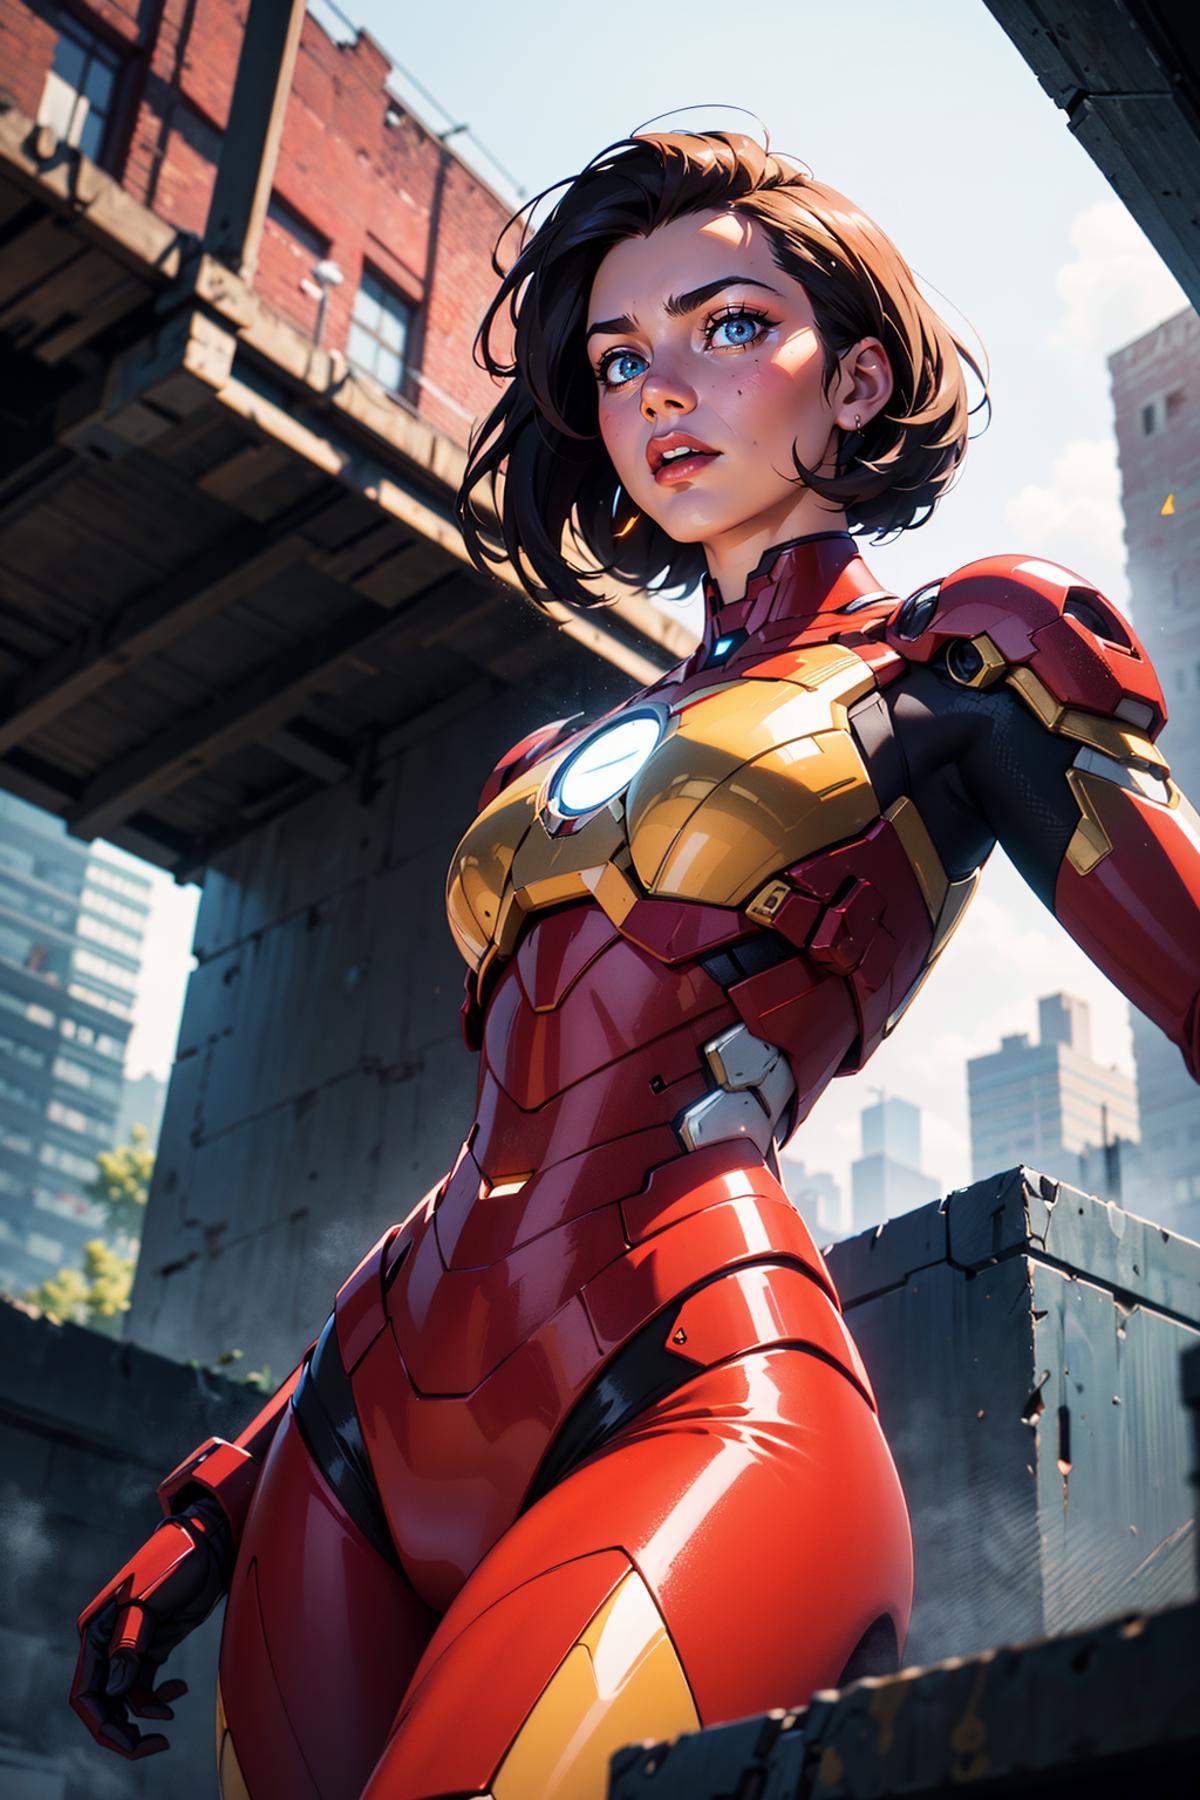 A 3D rendered image of a woman wearing a red and gold Iron Man suit.